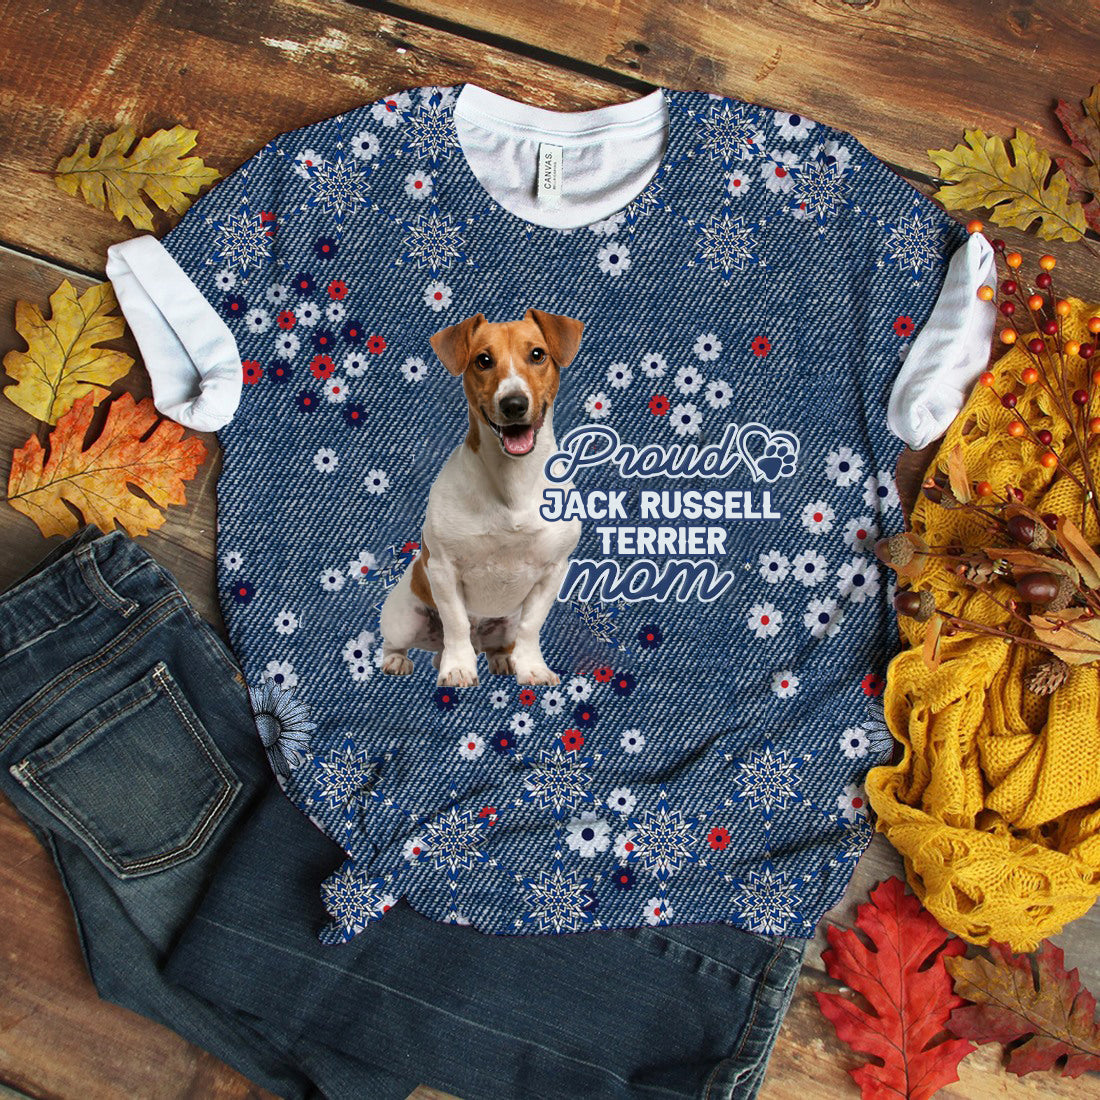 Jack Russell Terrier (2)-Pround Mom T-shirt